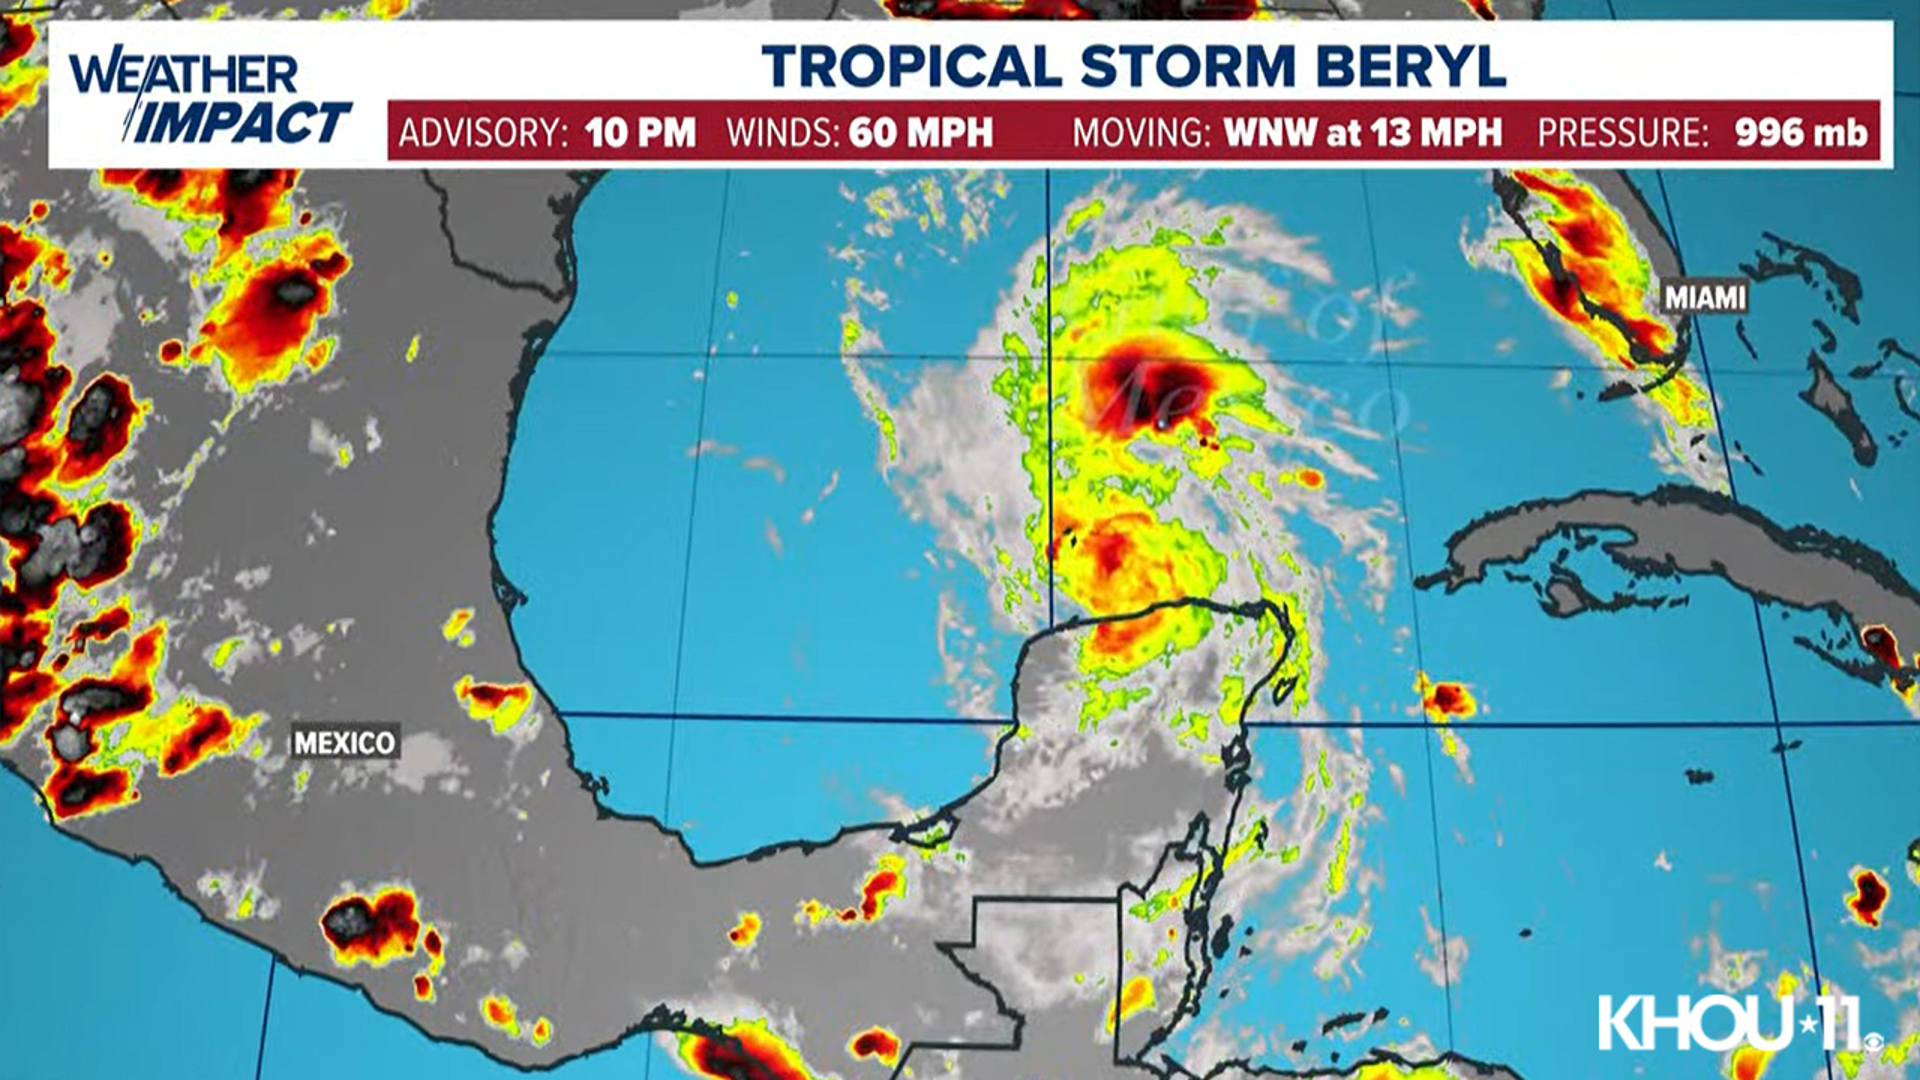 Tropical Storm Beryl is moving toward the Texas coast. These maps will help you stay up to date on the track of the storm as it edges closer.